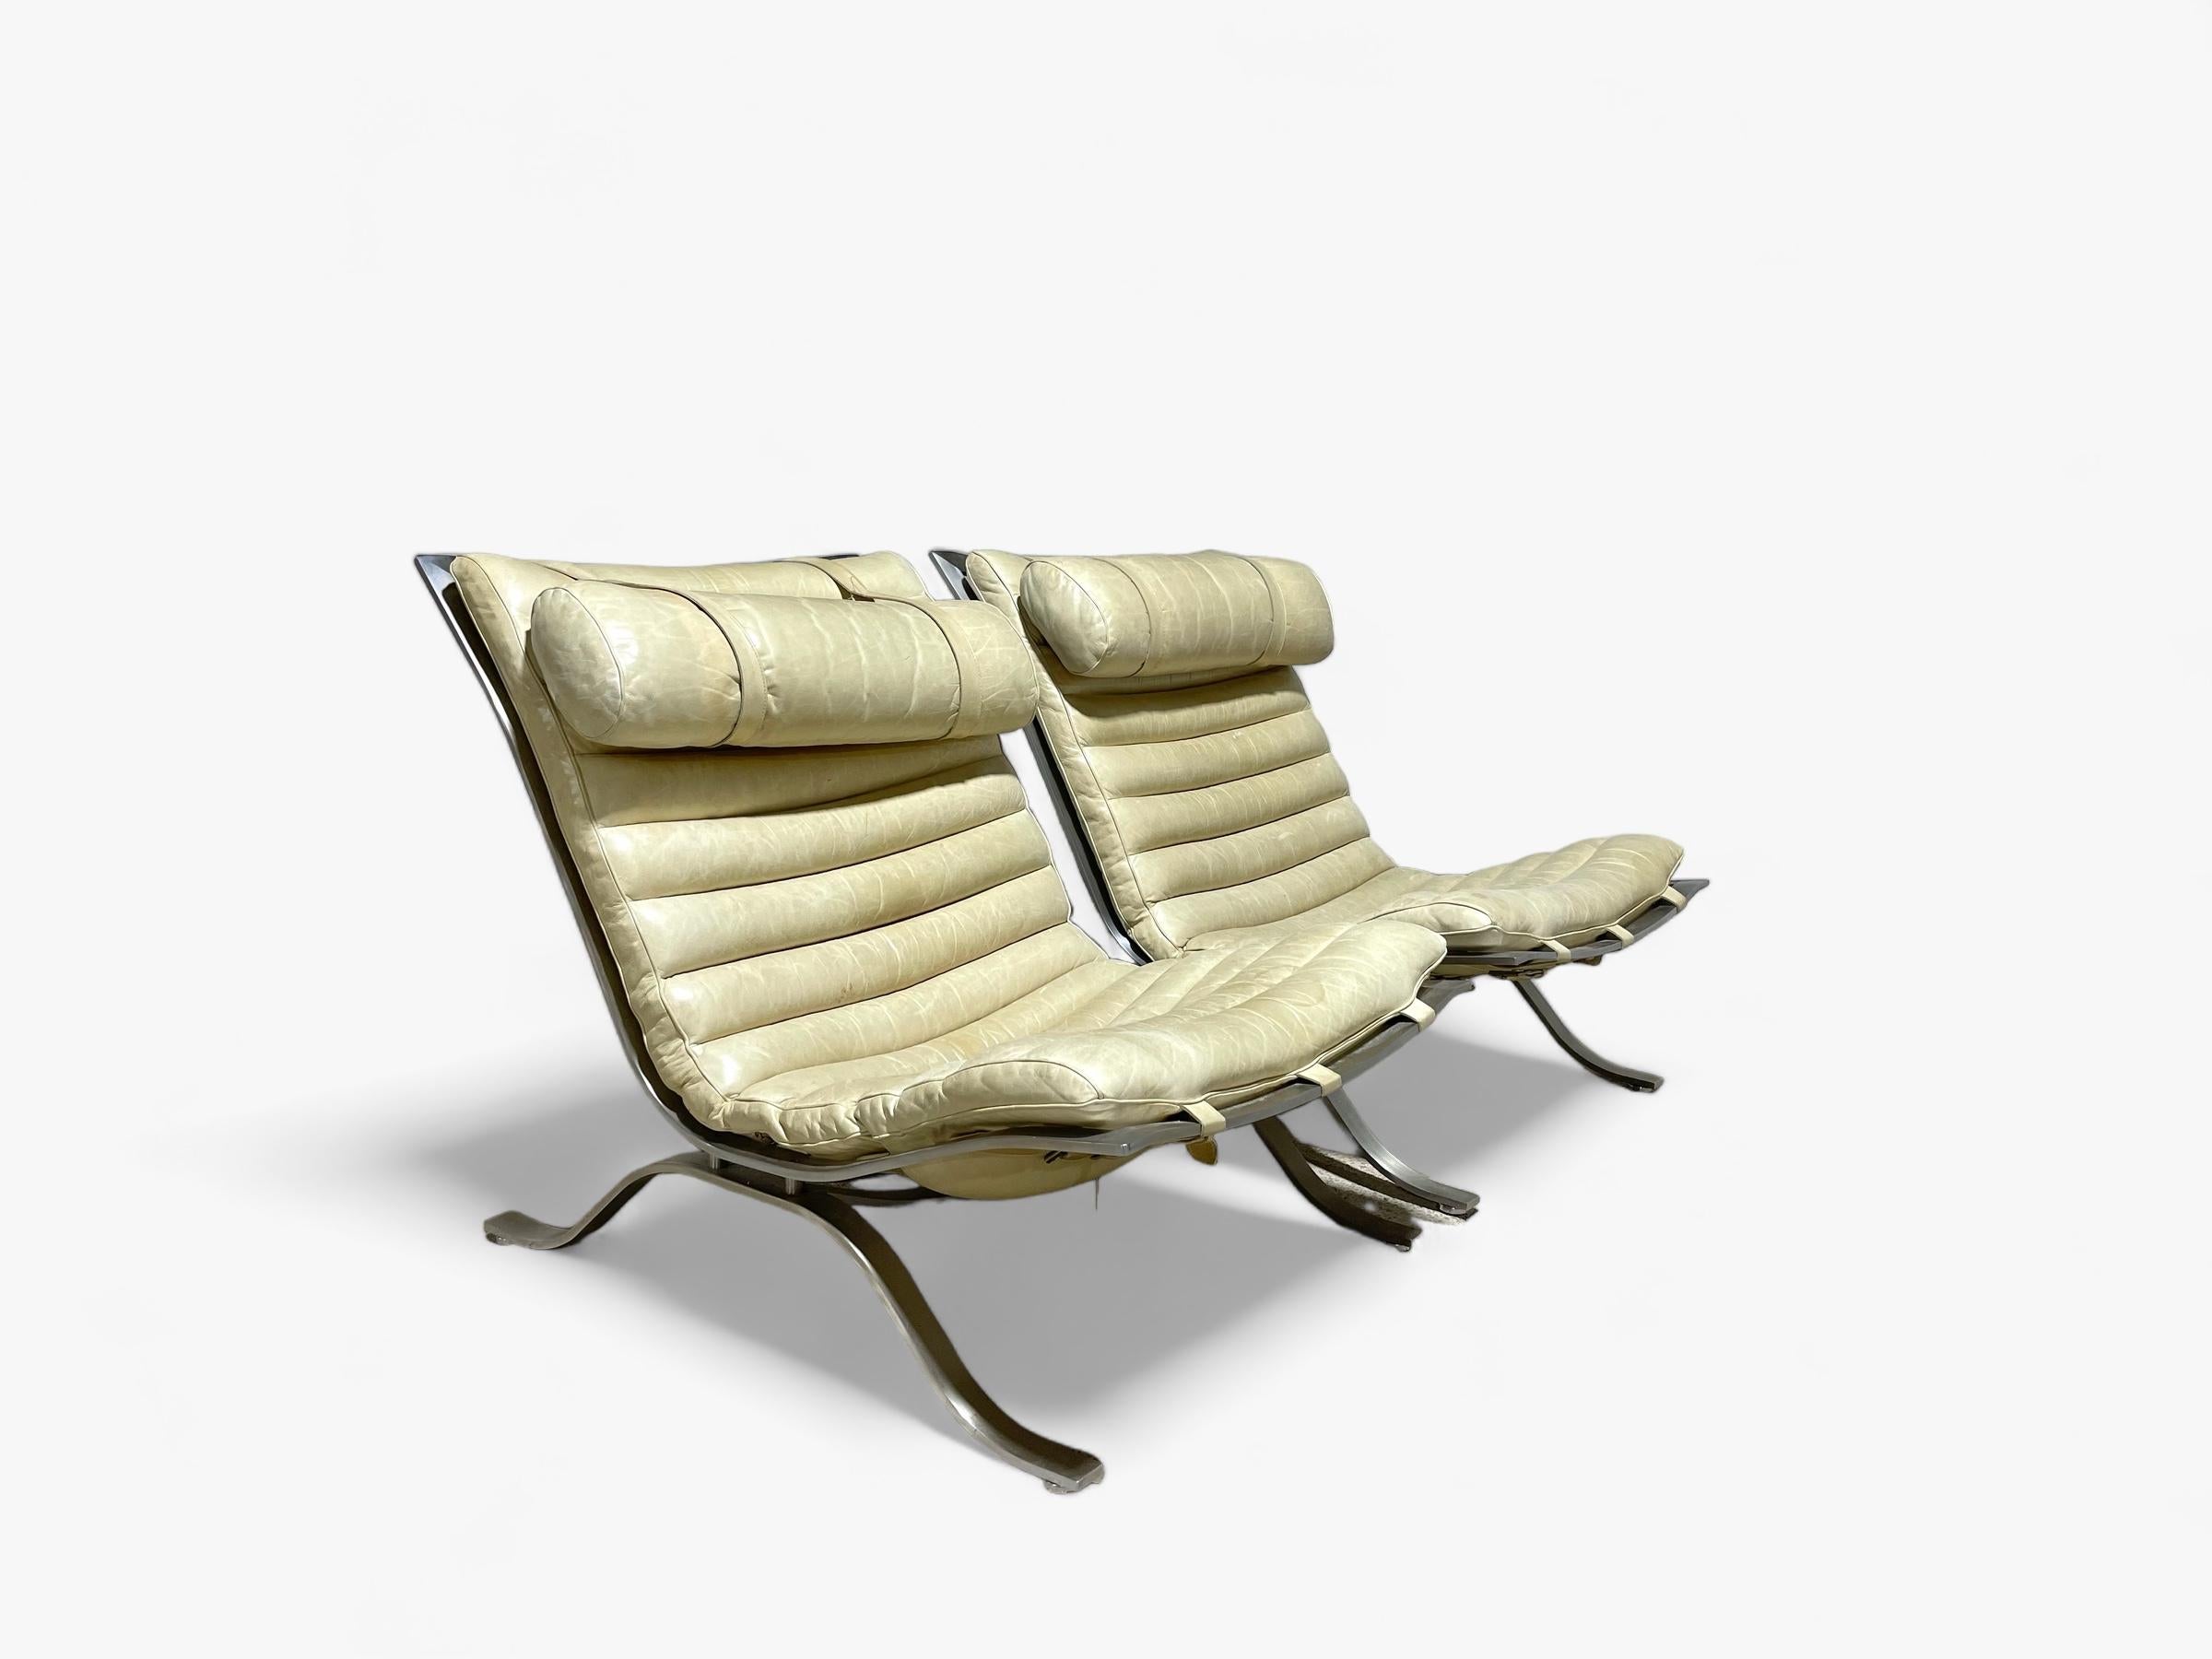 Pair of spectacular Arne Norell lounge chairs in patinated ivory leather. Arguably one of the most desired and collectible lounge chairs from the Scandinavian modern period. 

The chairs were made by Norell Møbel AB in Denmark in the 1960s. This